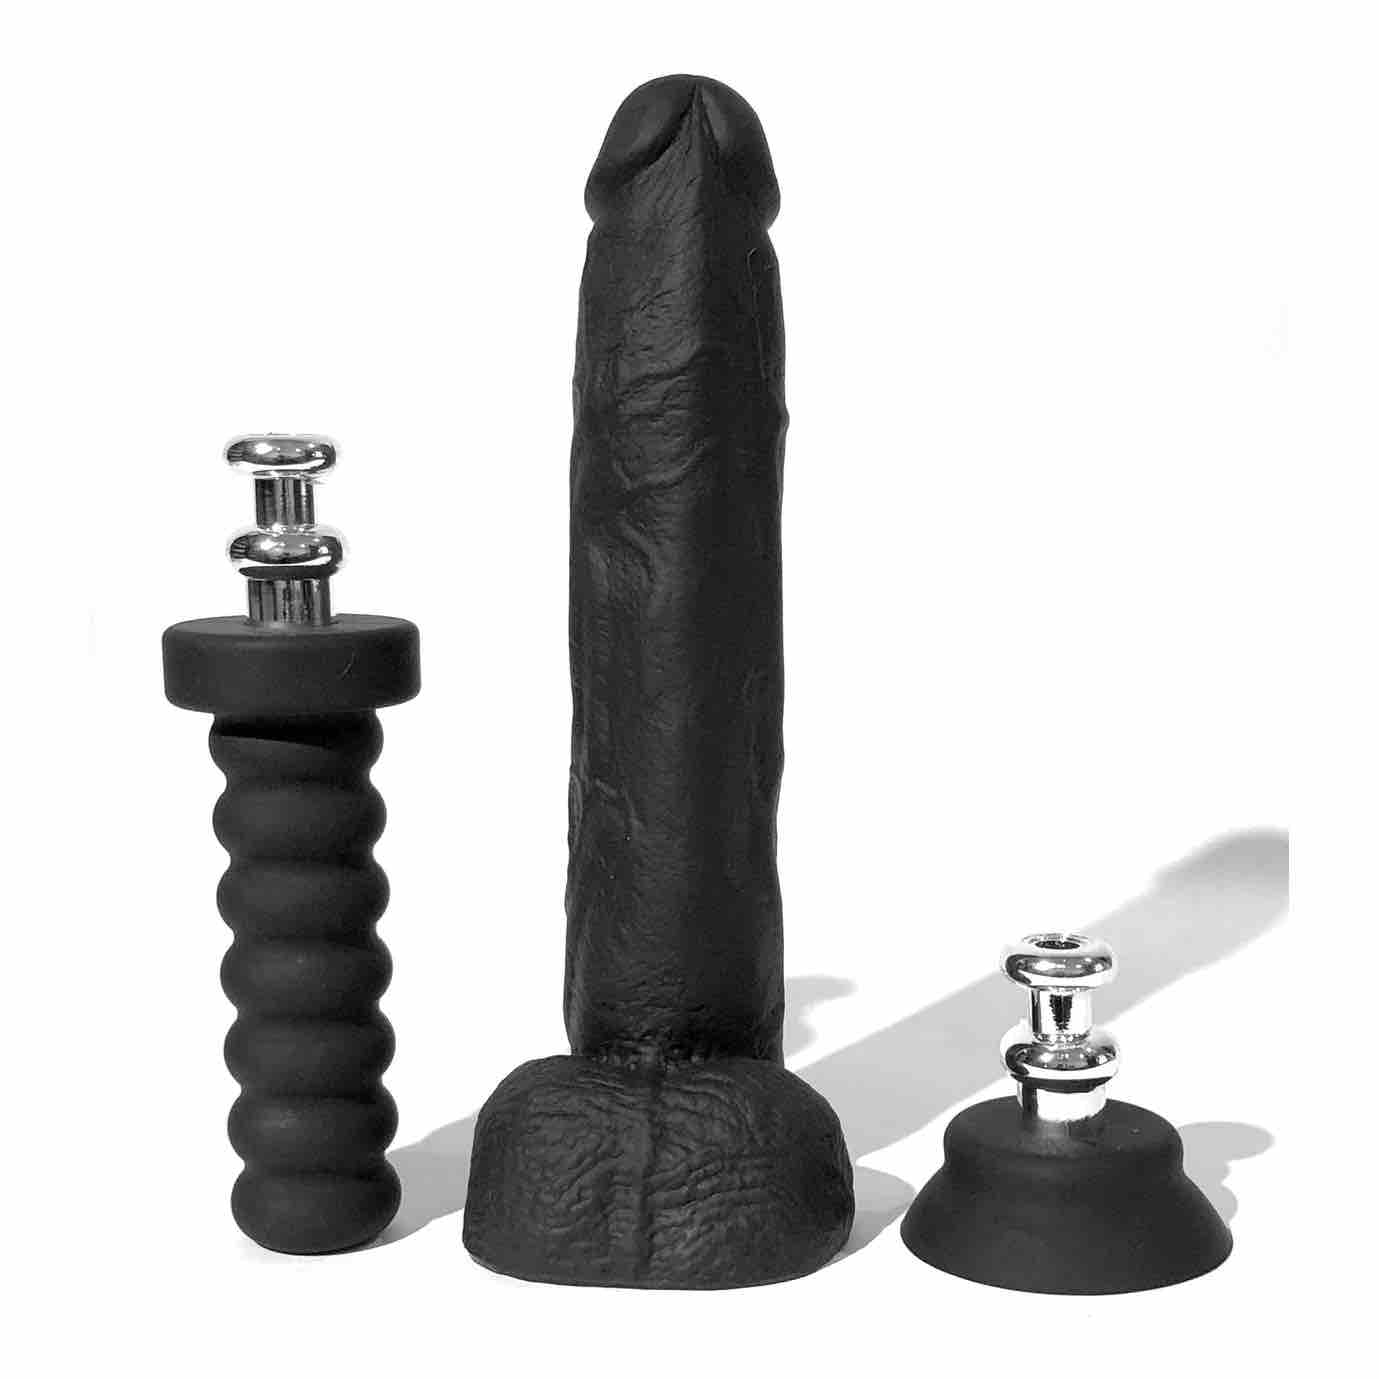 The 10 inch Boneyard Silicone Cock Set with separate handle and suction cup.